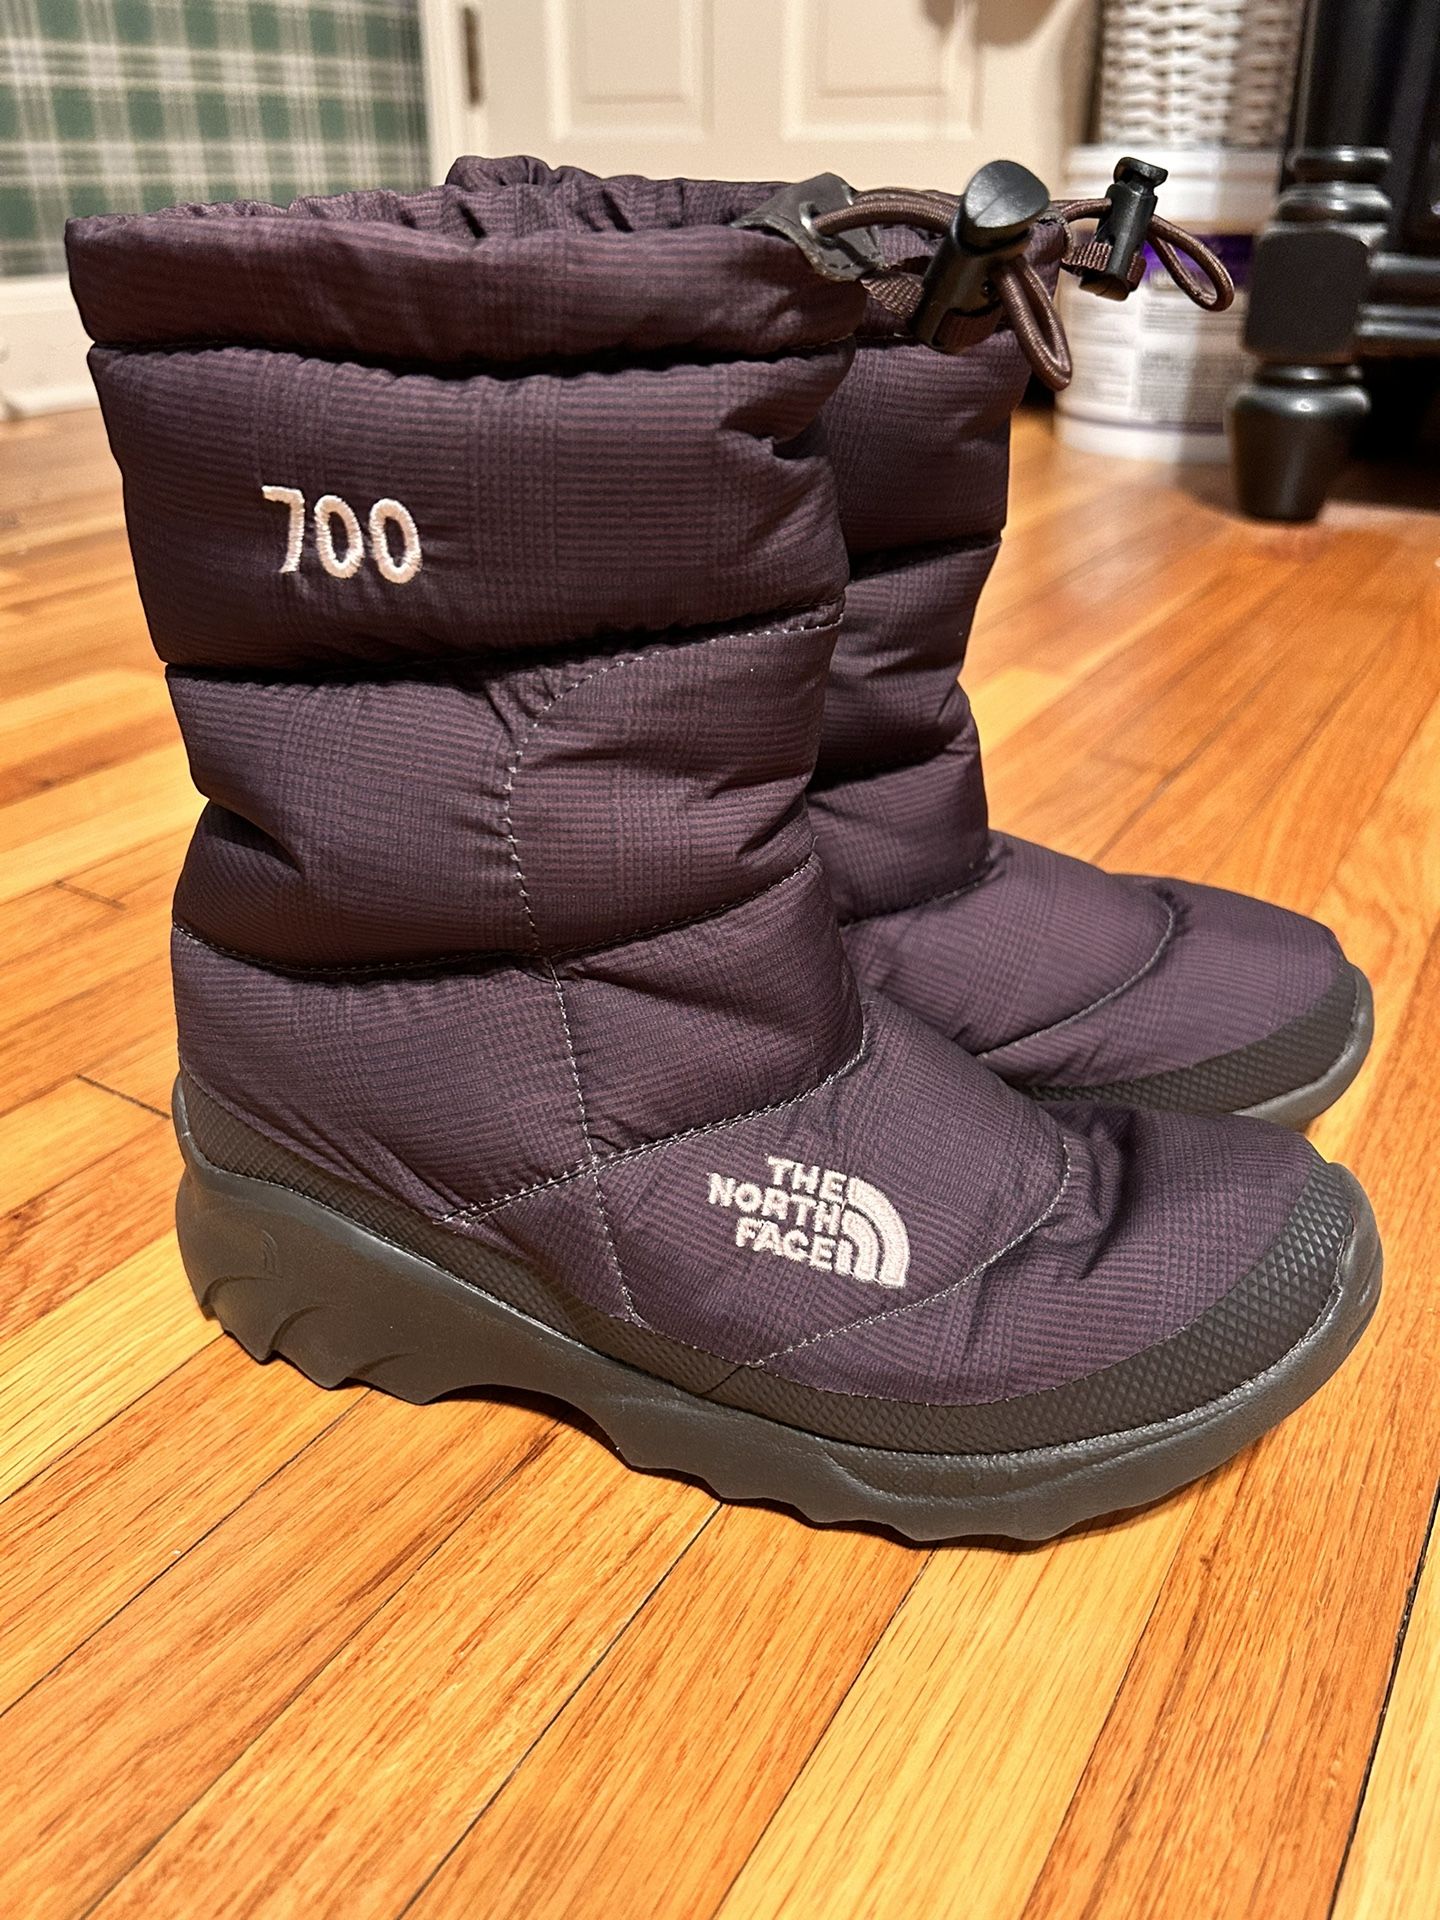 the north face 700 down winter boots womens 6